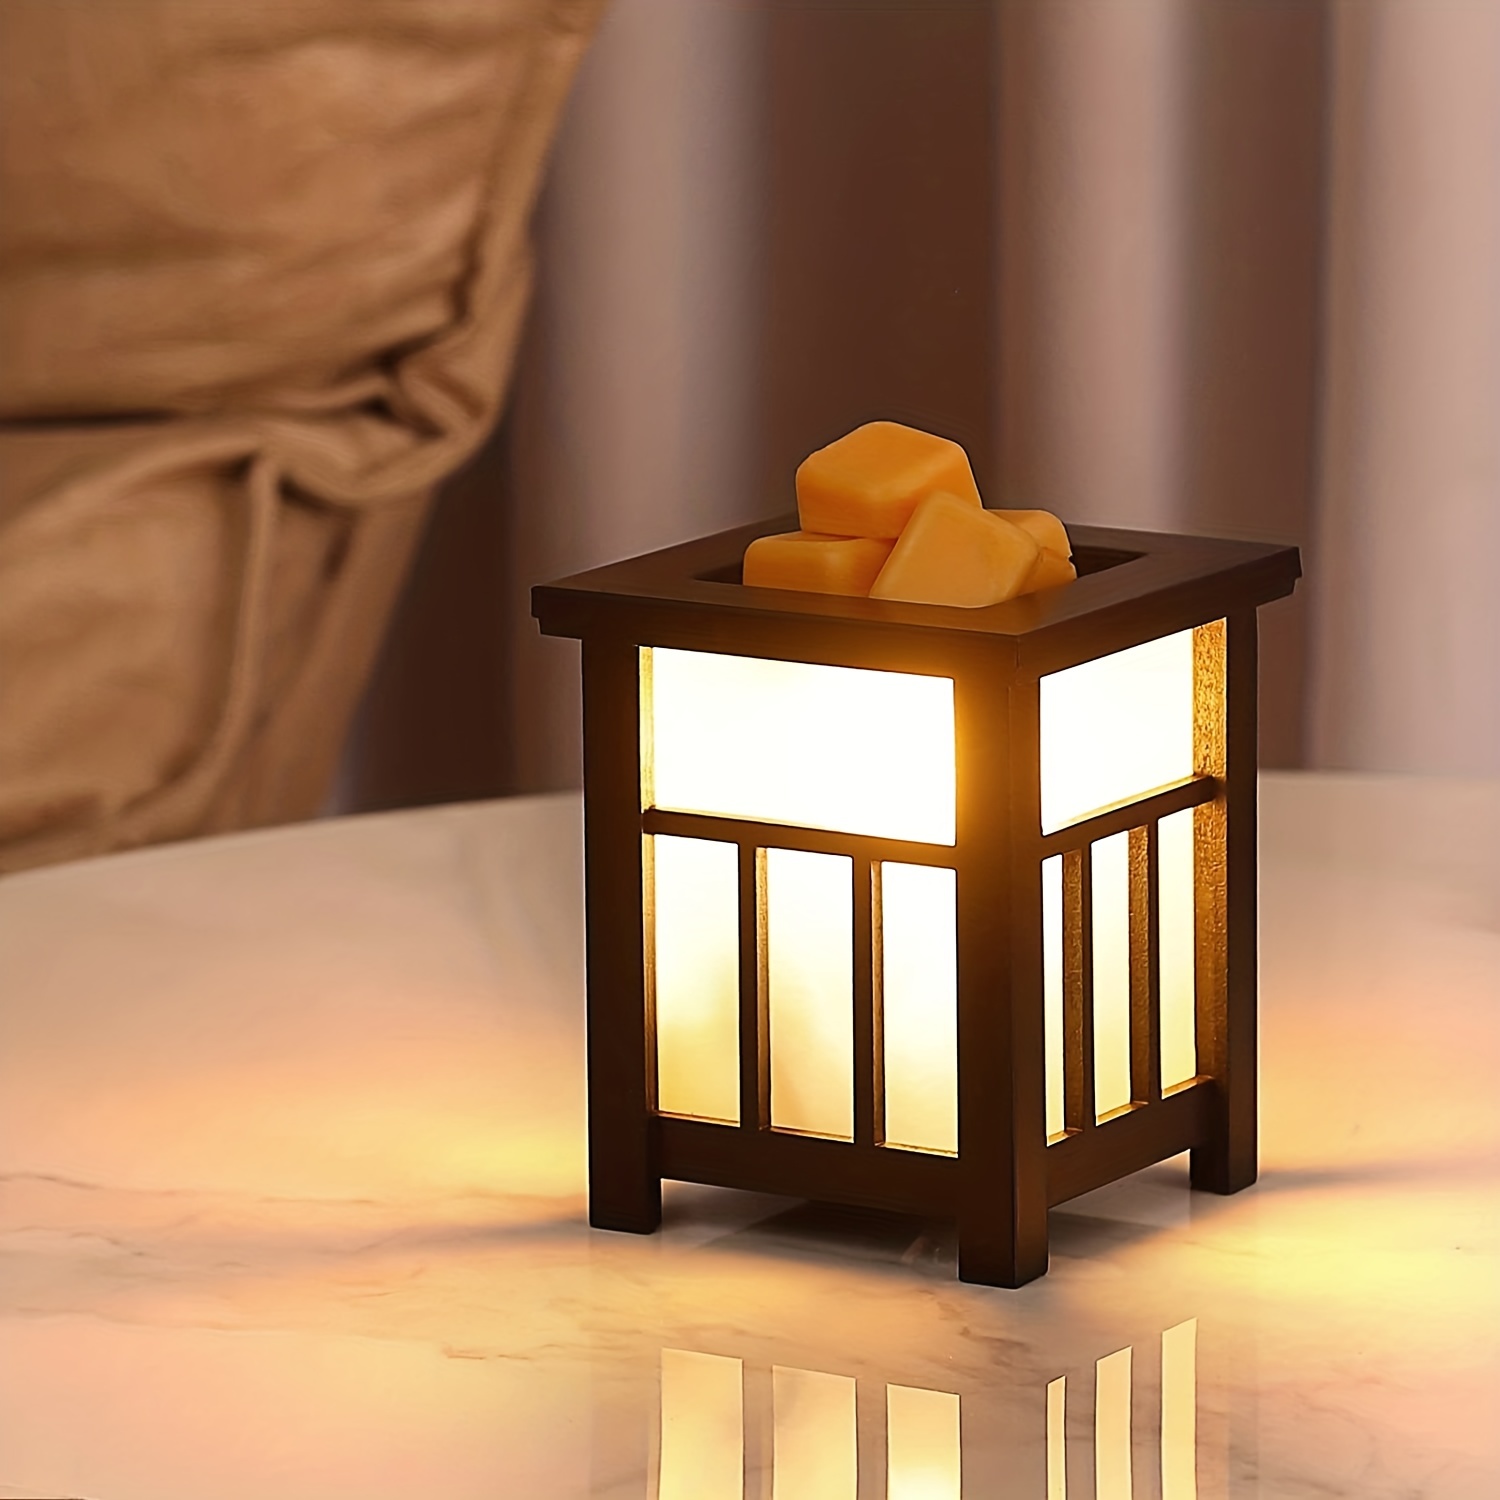 Outlet Plug-in Wax Warmer for Scented Wax Candle Burner Warmer 